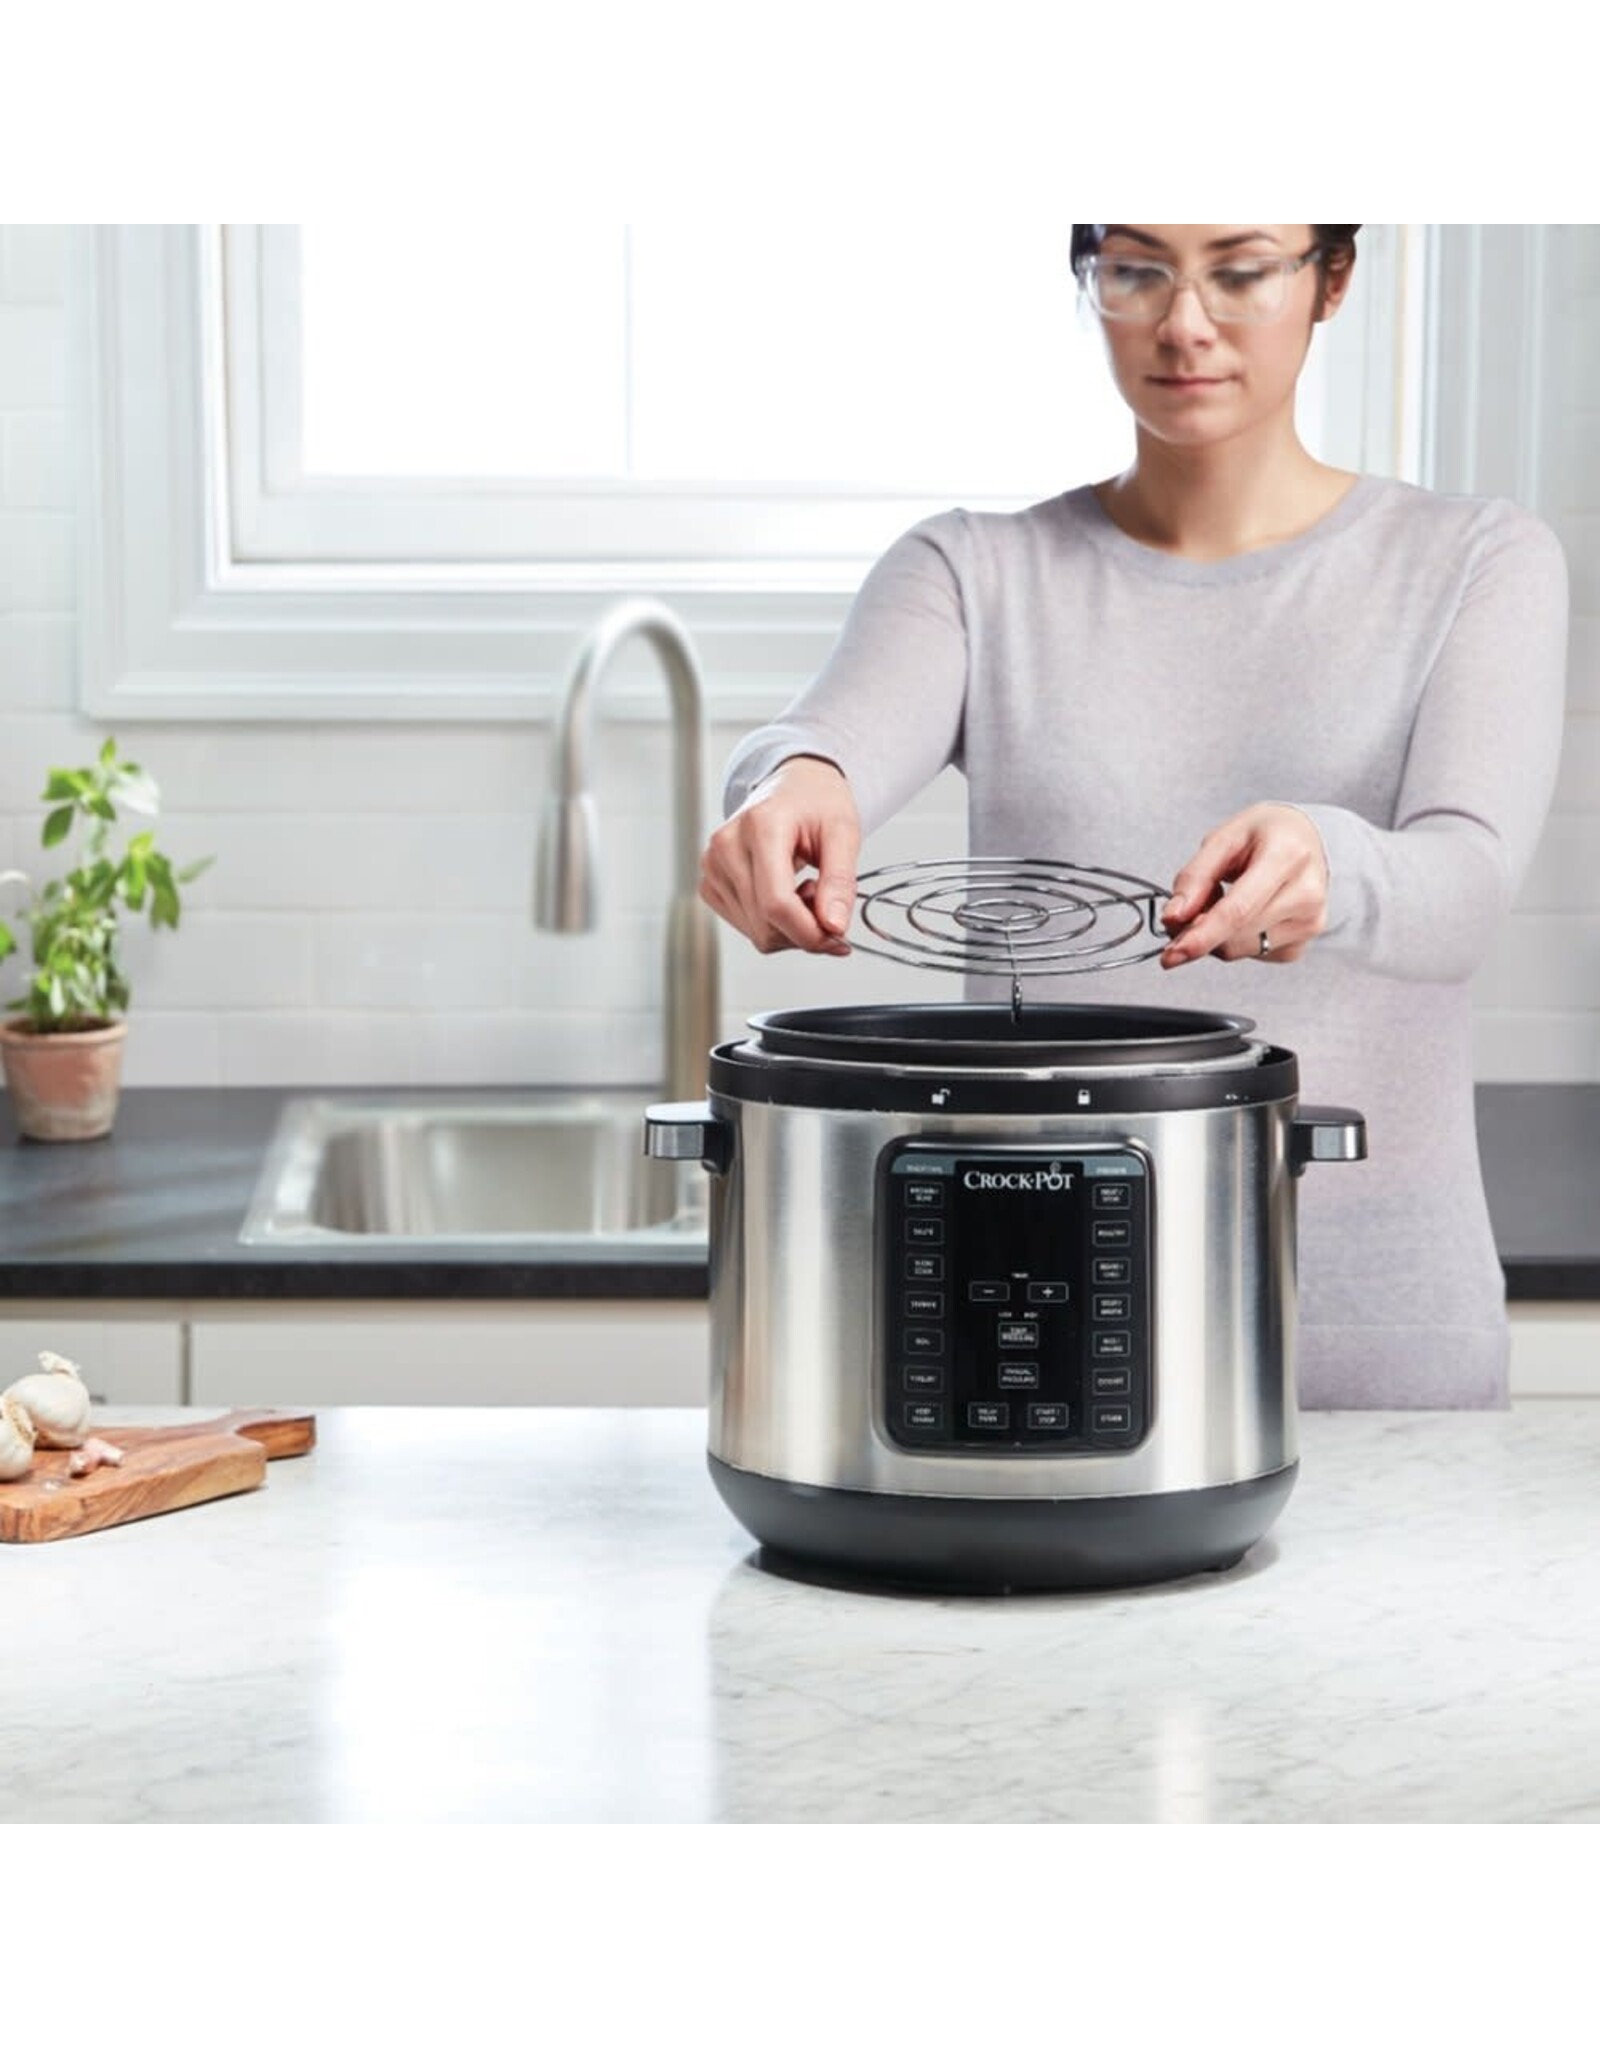 Crock-pot SCCPPC800-V1 Crock-Pot 8-Quart Multi-Use XL Express Crock Programmable Slow Cooker and Pressure Cooker with Manual Pressure, Boil & Simmer, Black Stainless